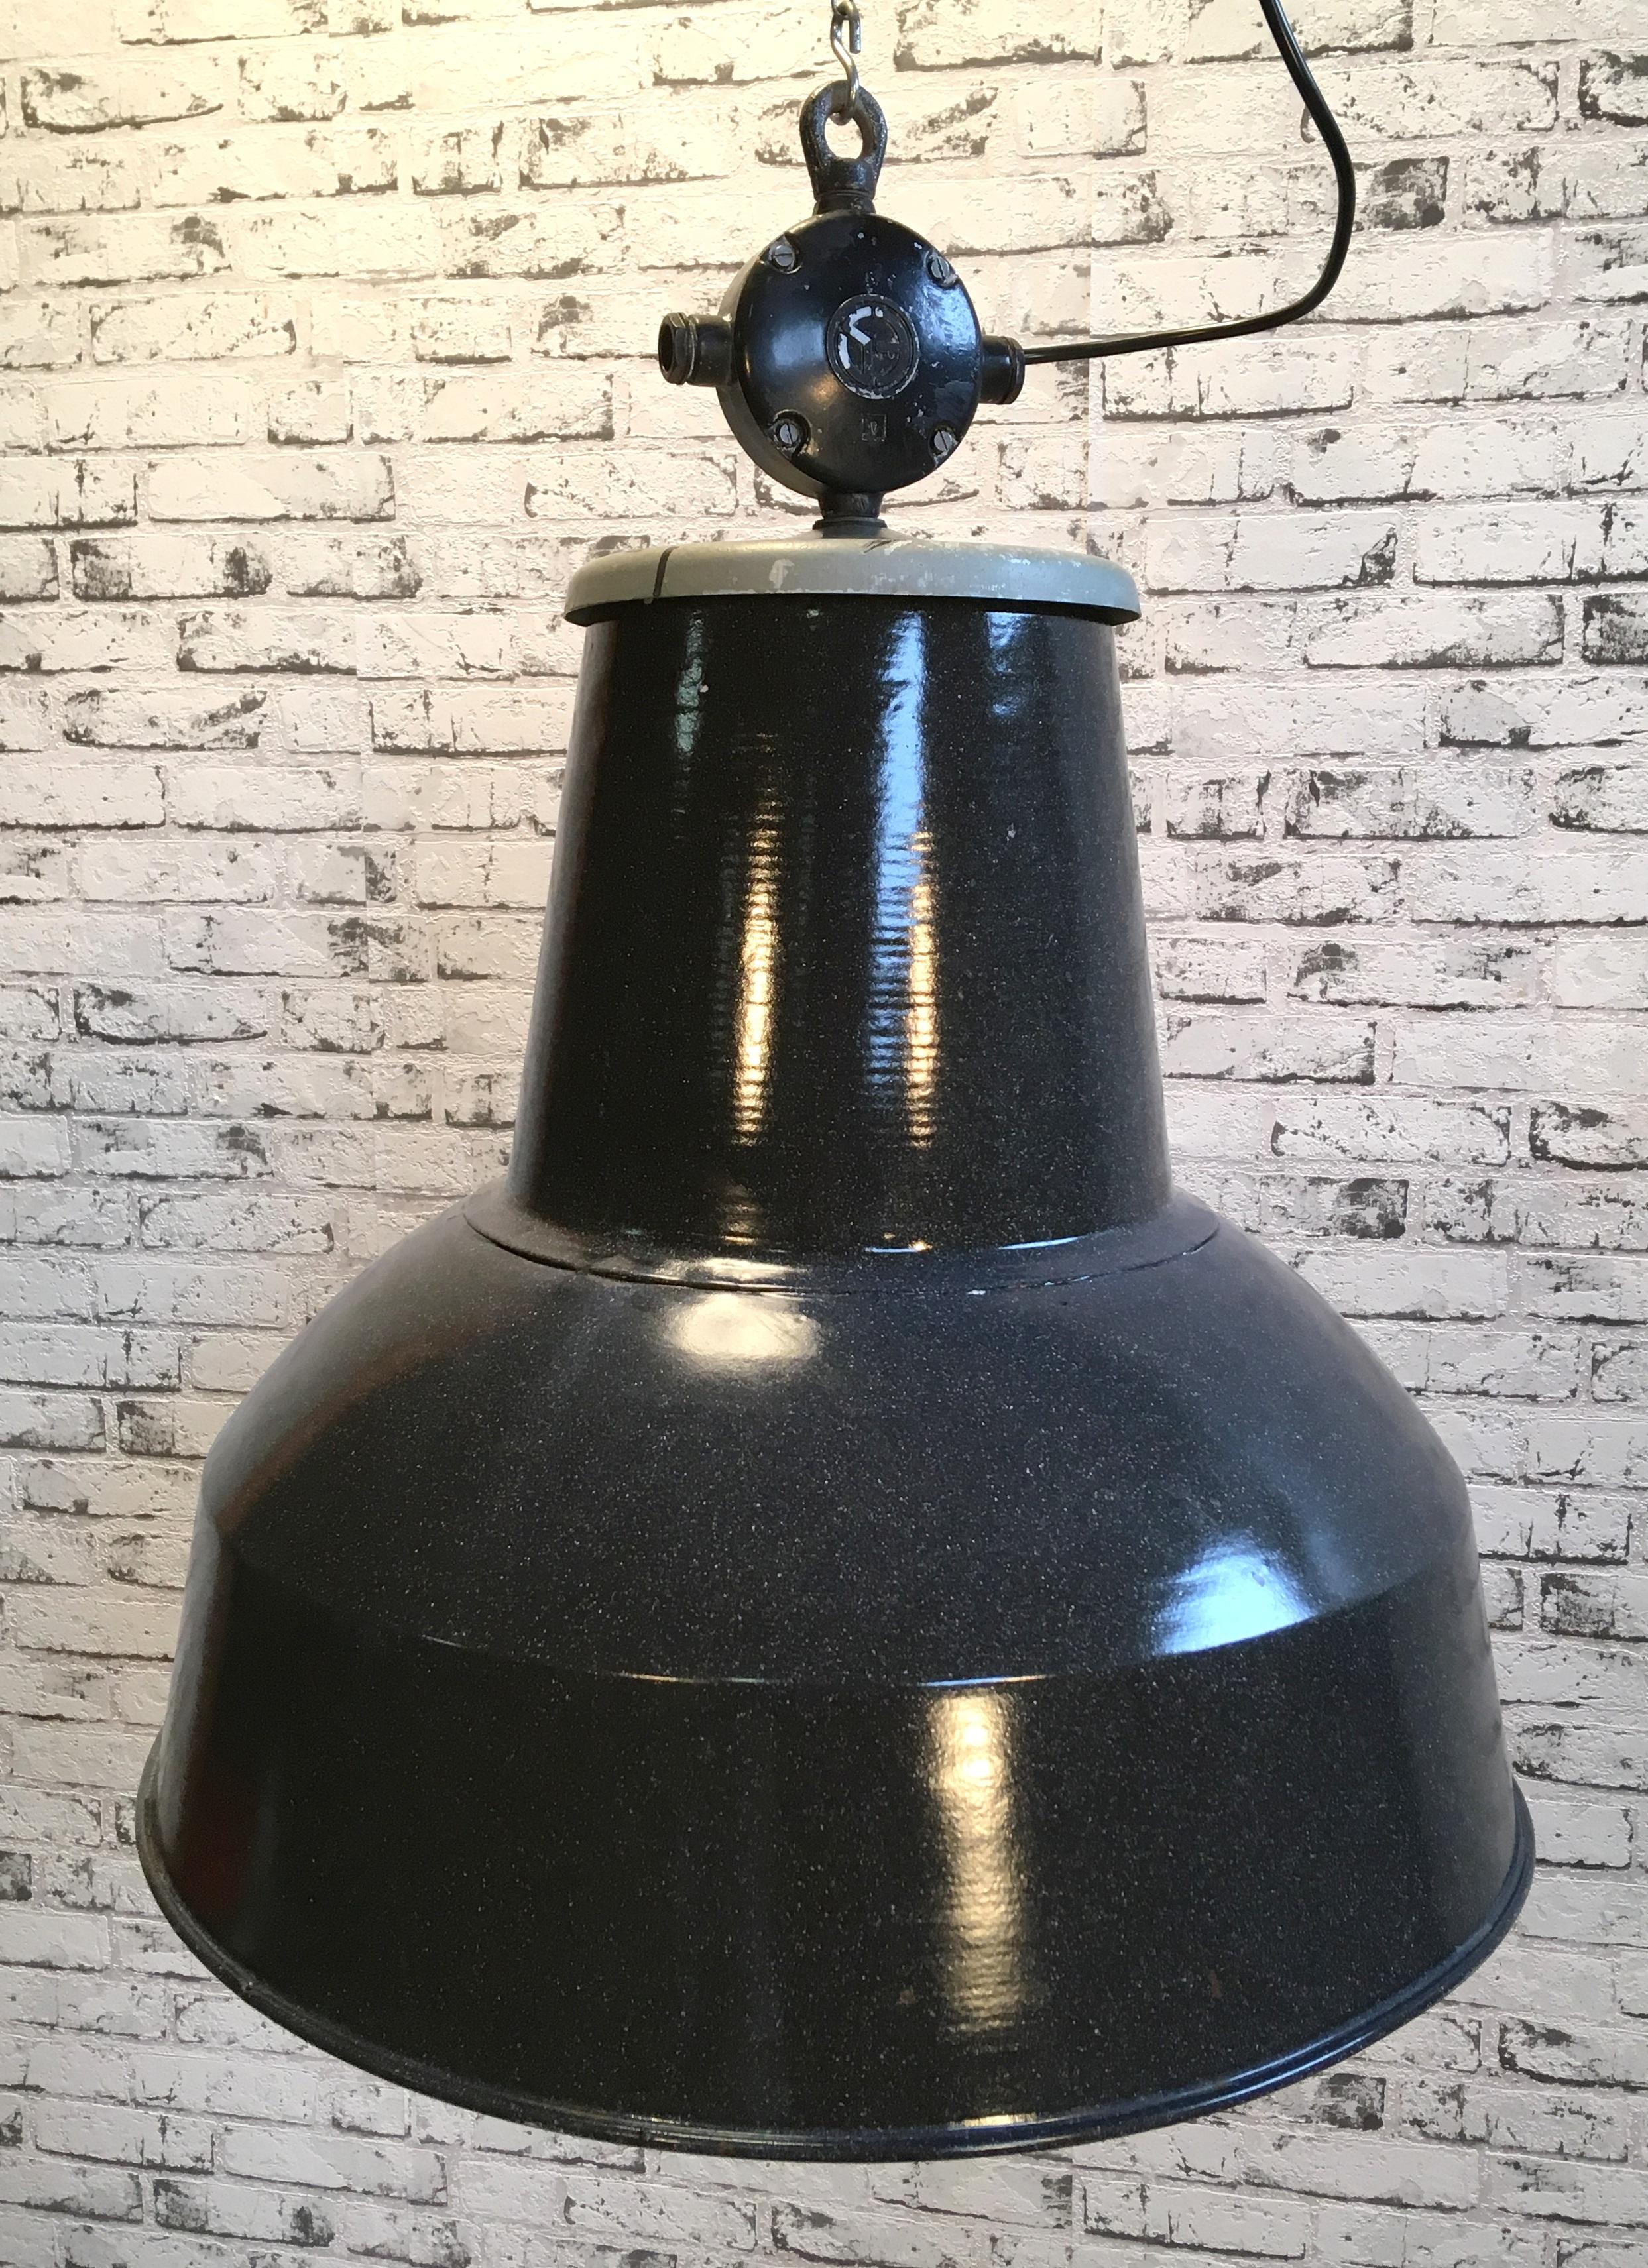 Eastern Bloc industrial pendant lamp. Comes from former Czechoslovakia. Made by Elektrosvit during the 1950s.
Rare type of industrial lamp. New socket for E 27 lightbulbs and wire. Grey enamel, white interior, cast aluminium top. Weighs 9 kg.